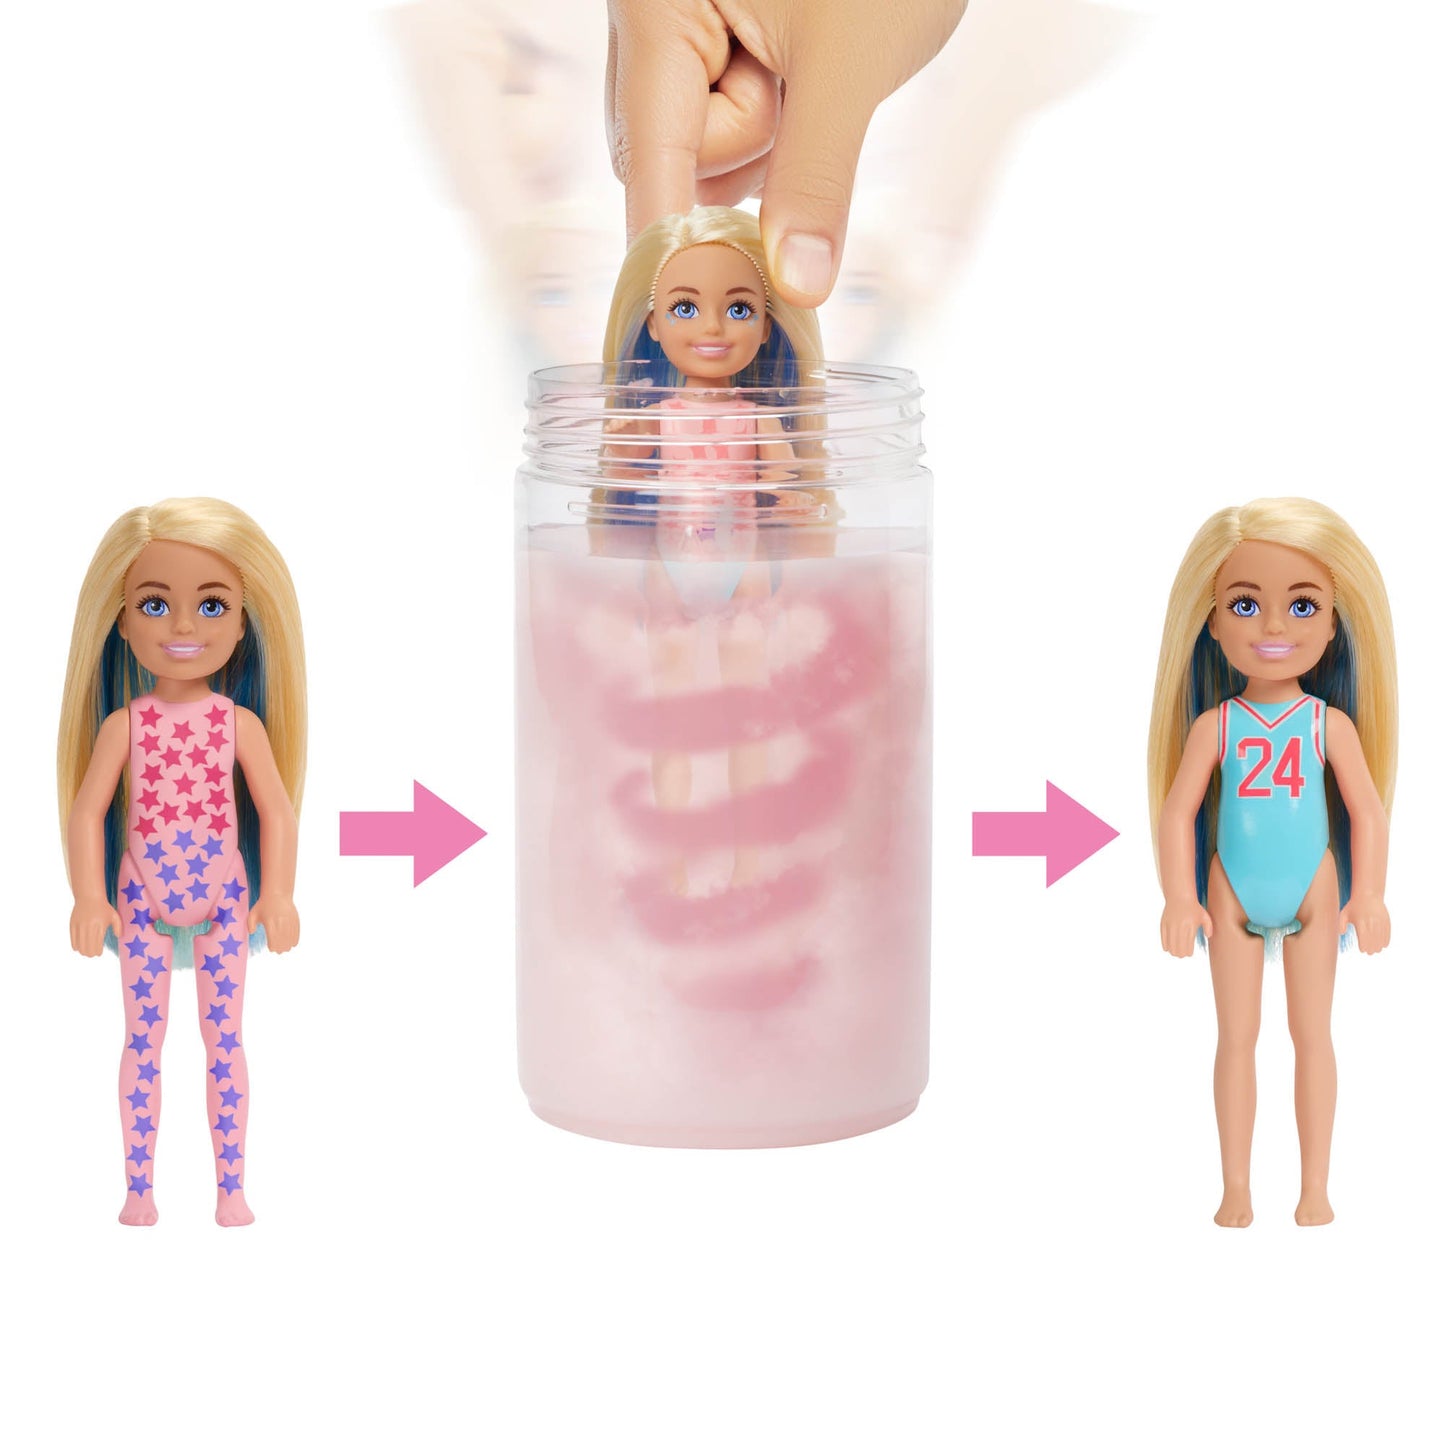 Barbie Colour Reveal Doll - Assorted*